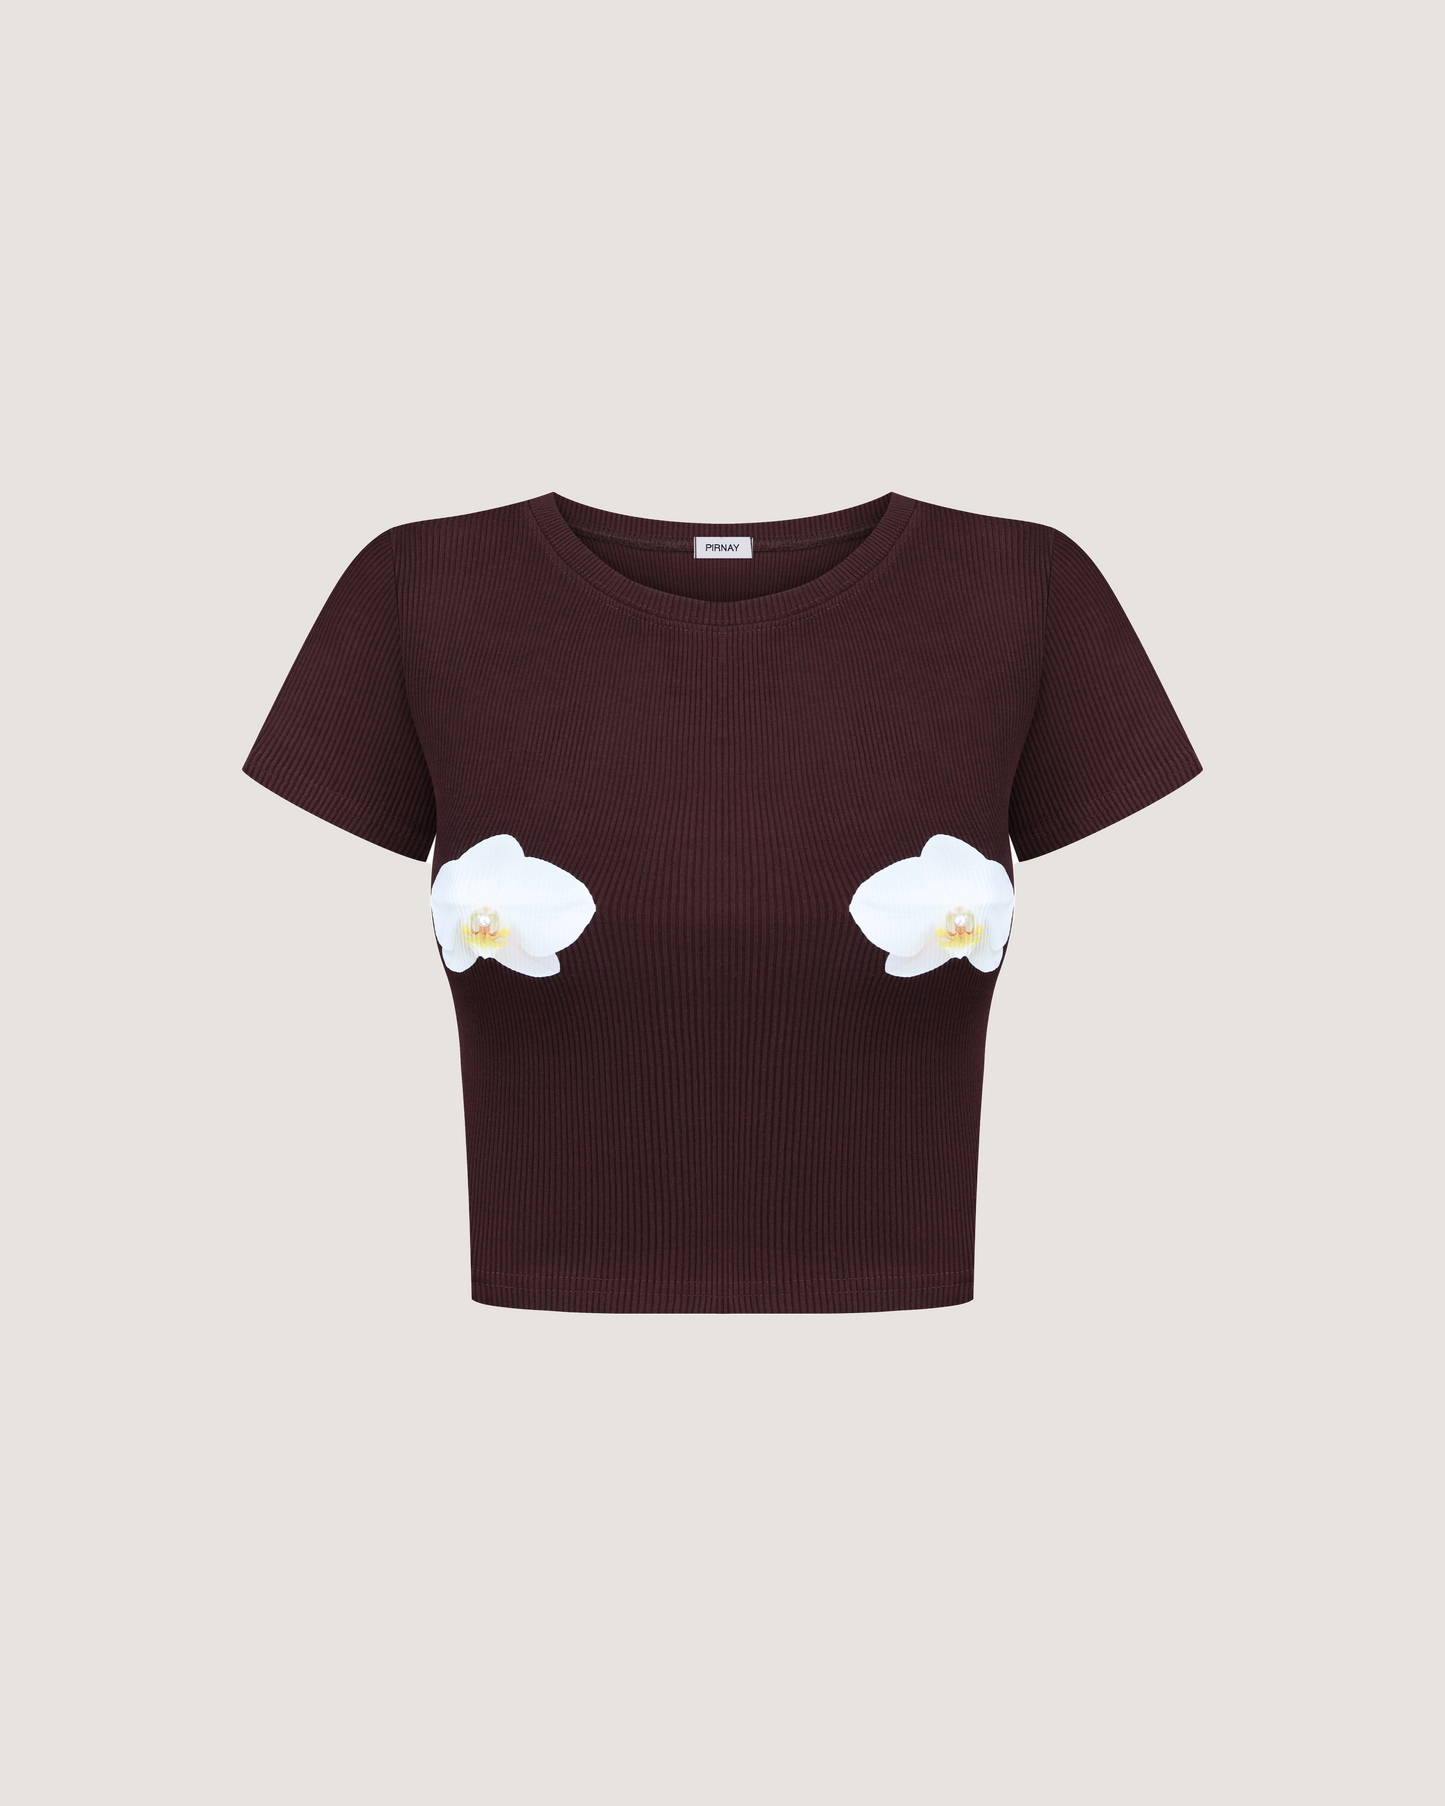 T-shirt with orchid in brown